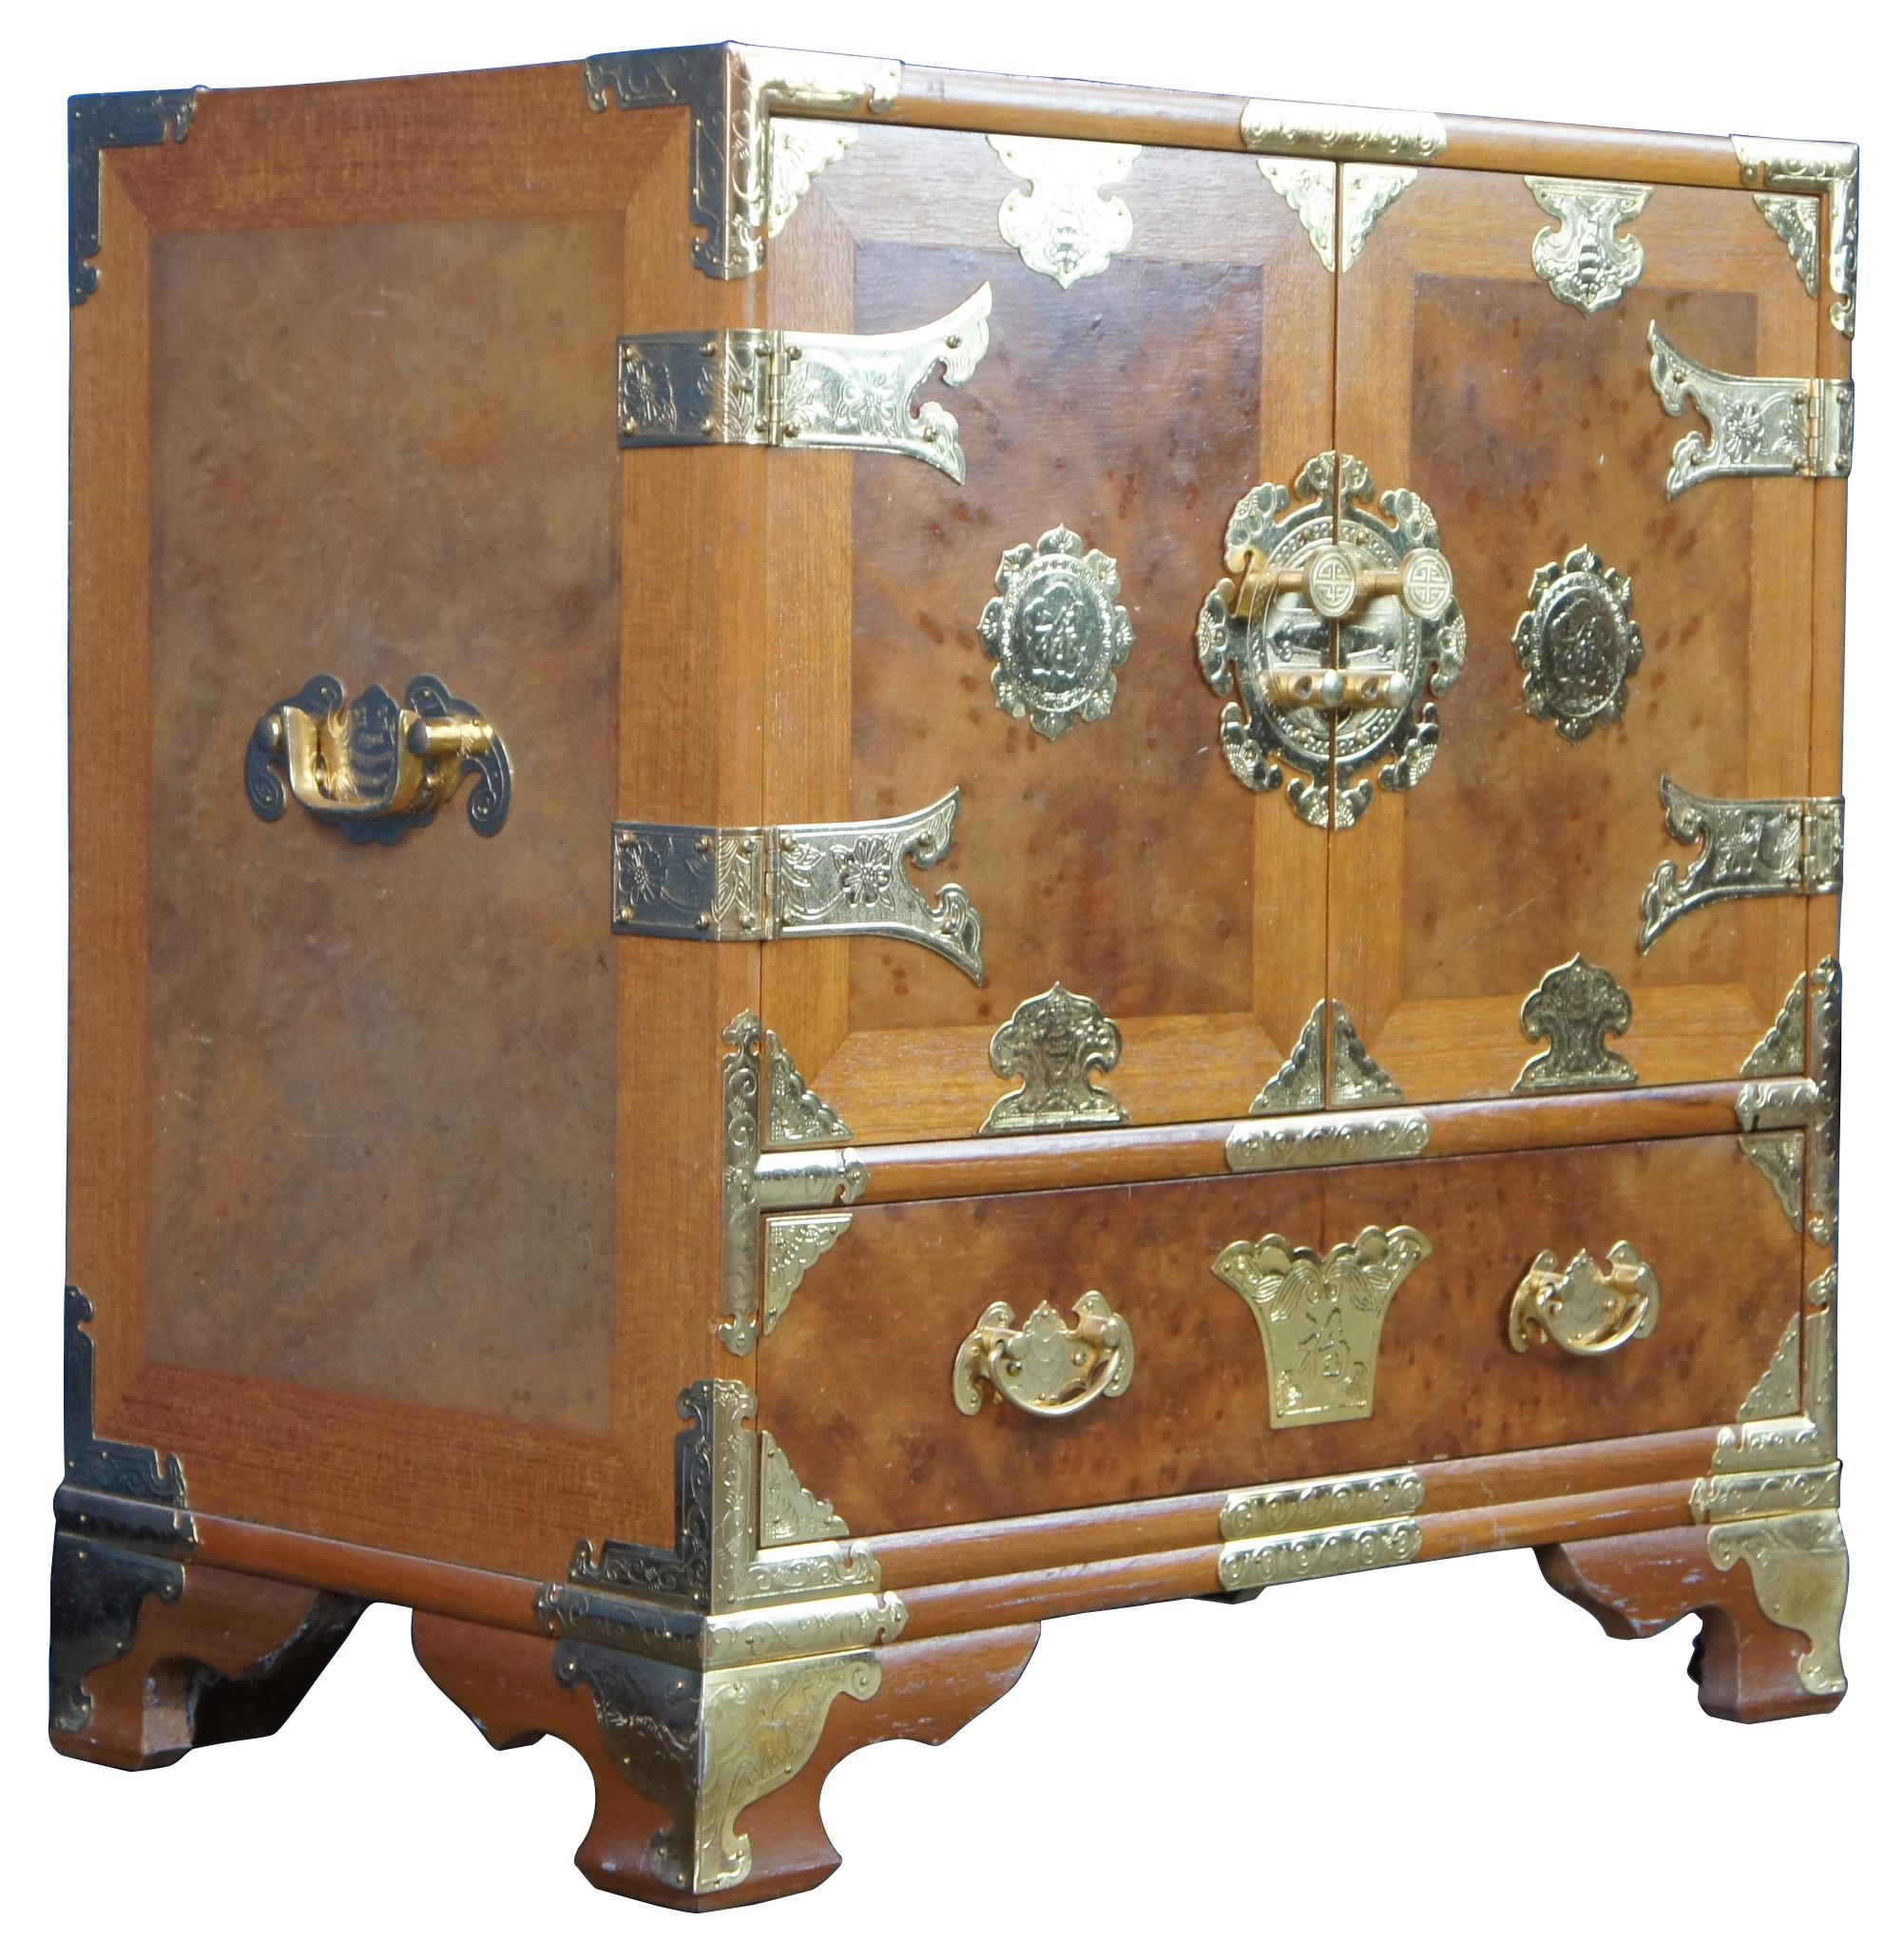 Mid century tansu inspired chest featuring elm burl wood case with a heavy adornment of brass accents.
  